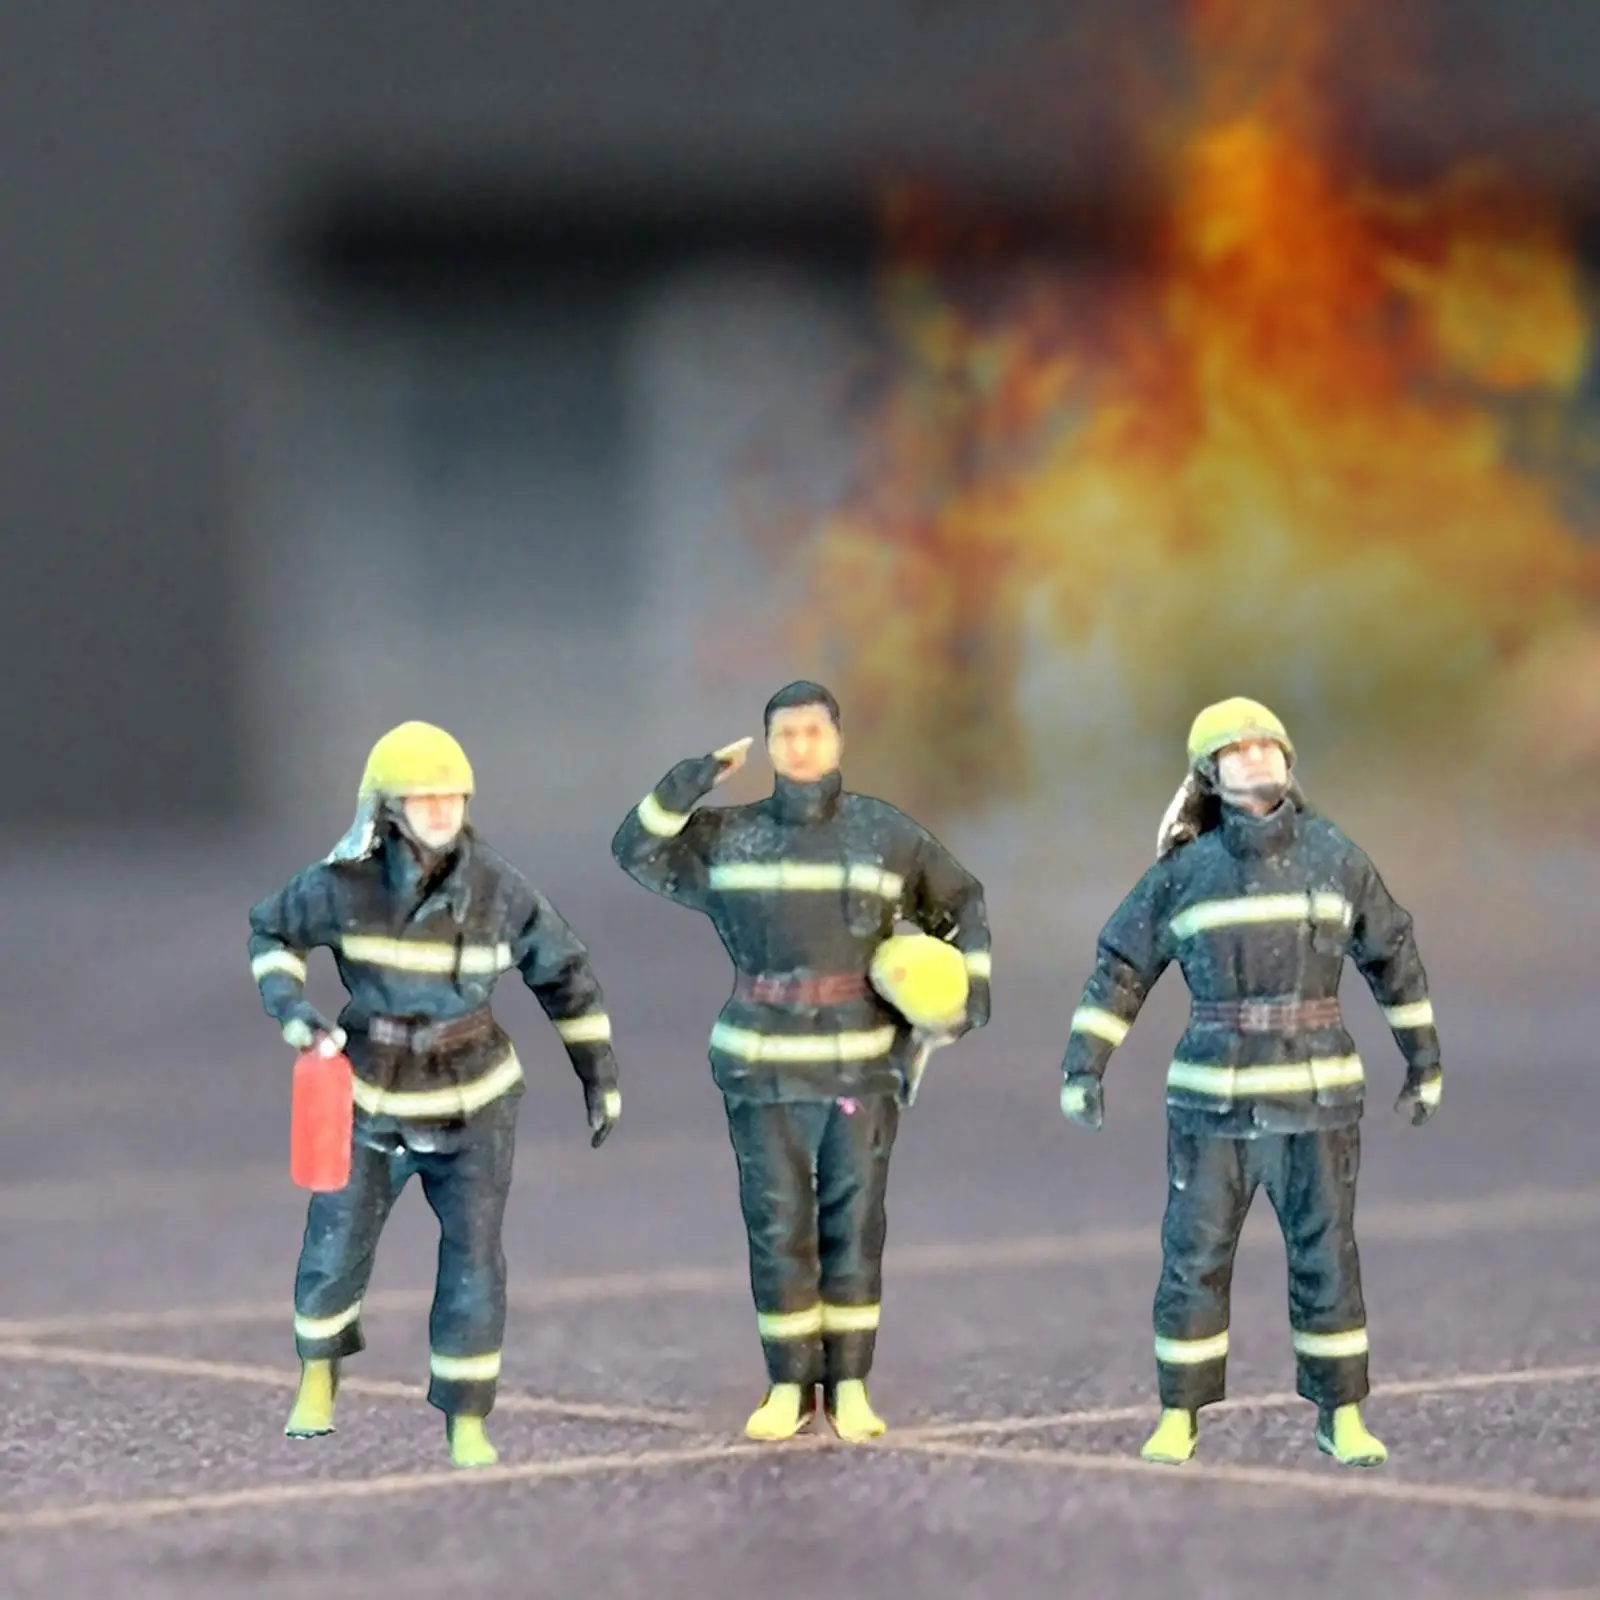 1/64 Scale Firefighter Model Architecture Model Hand Painted Tiny People Model for Diorama DIY Scene Photography Props Decor